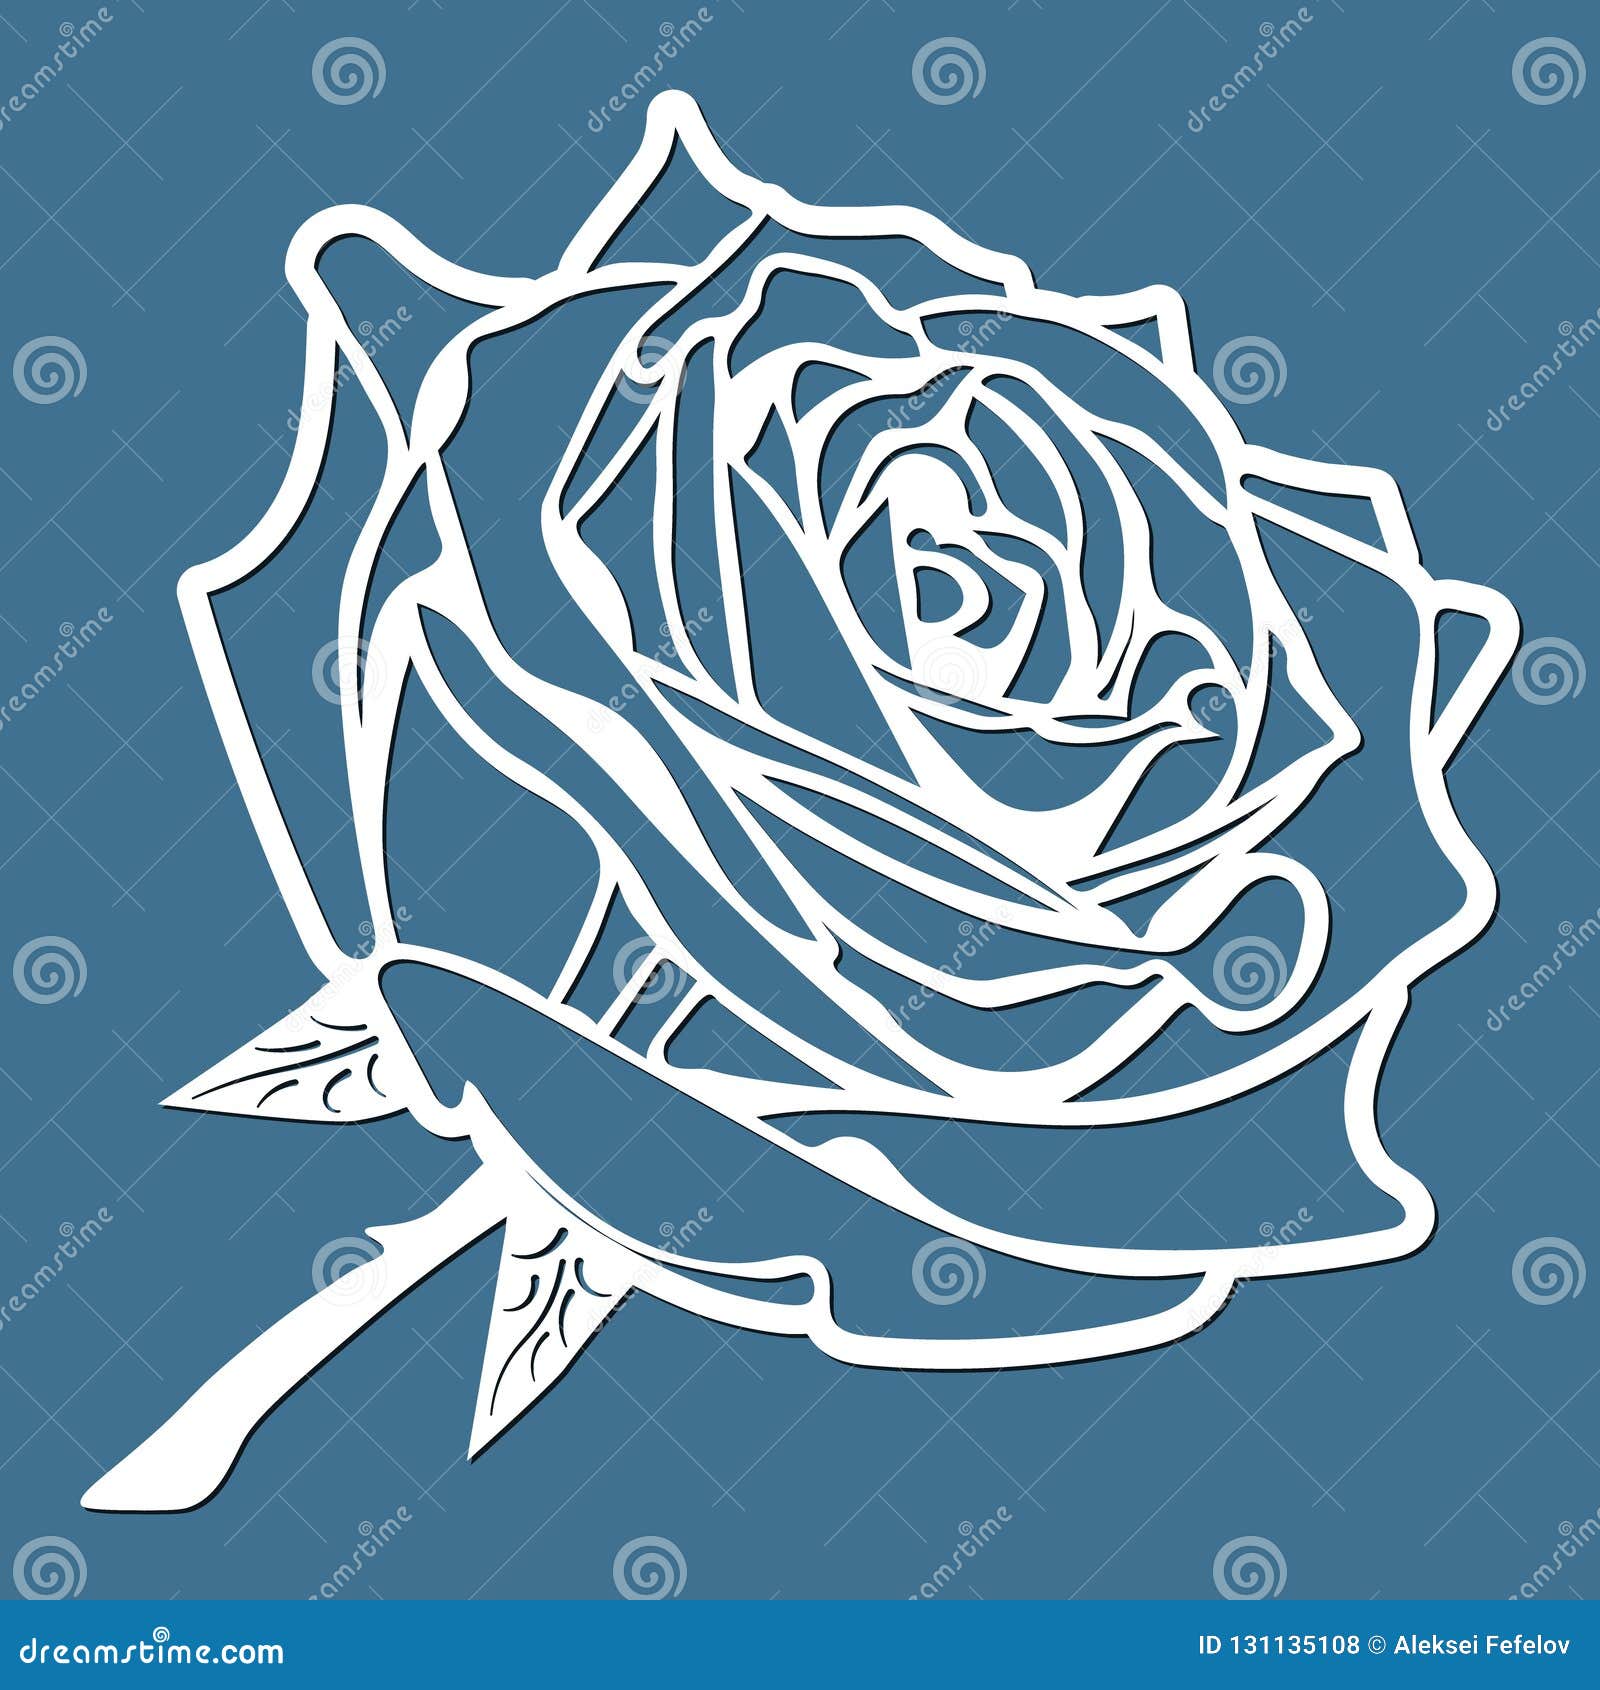 Love Letter Paper with Red Rose Background Stock Illustration -  Illustration of abstract, rose: 603541